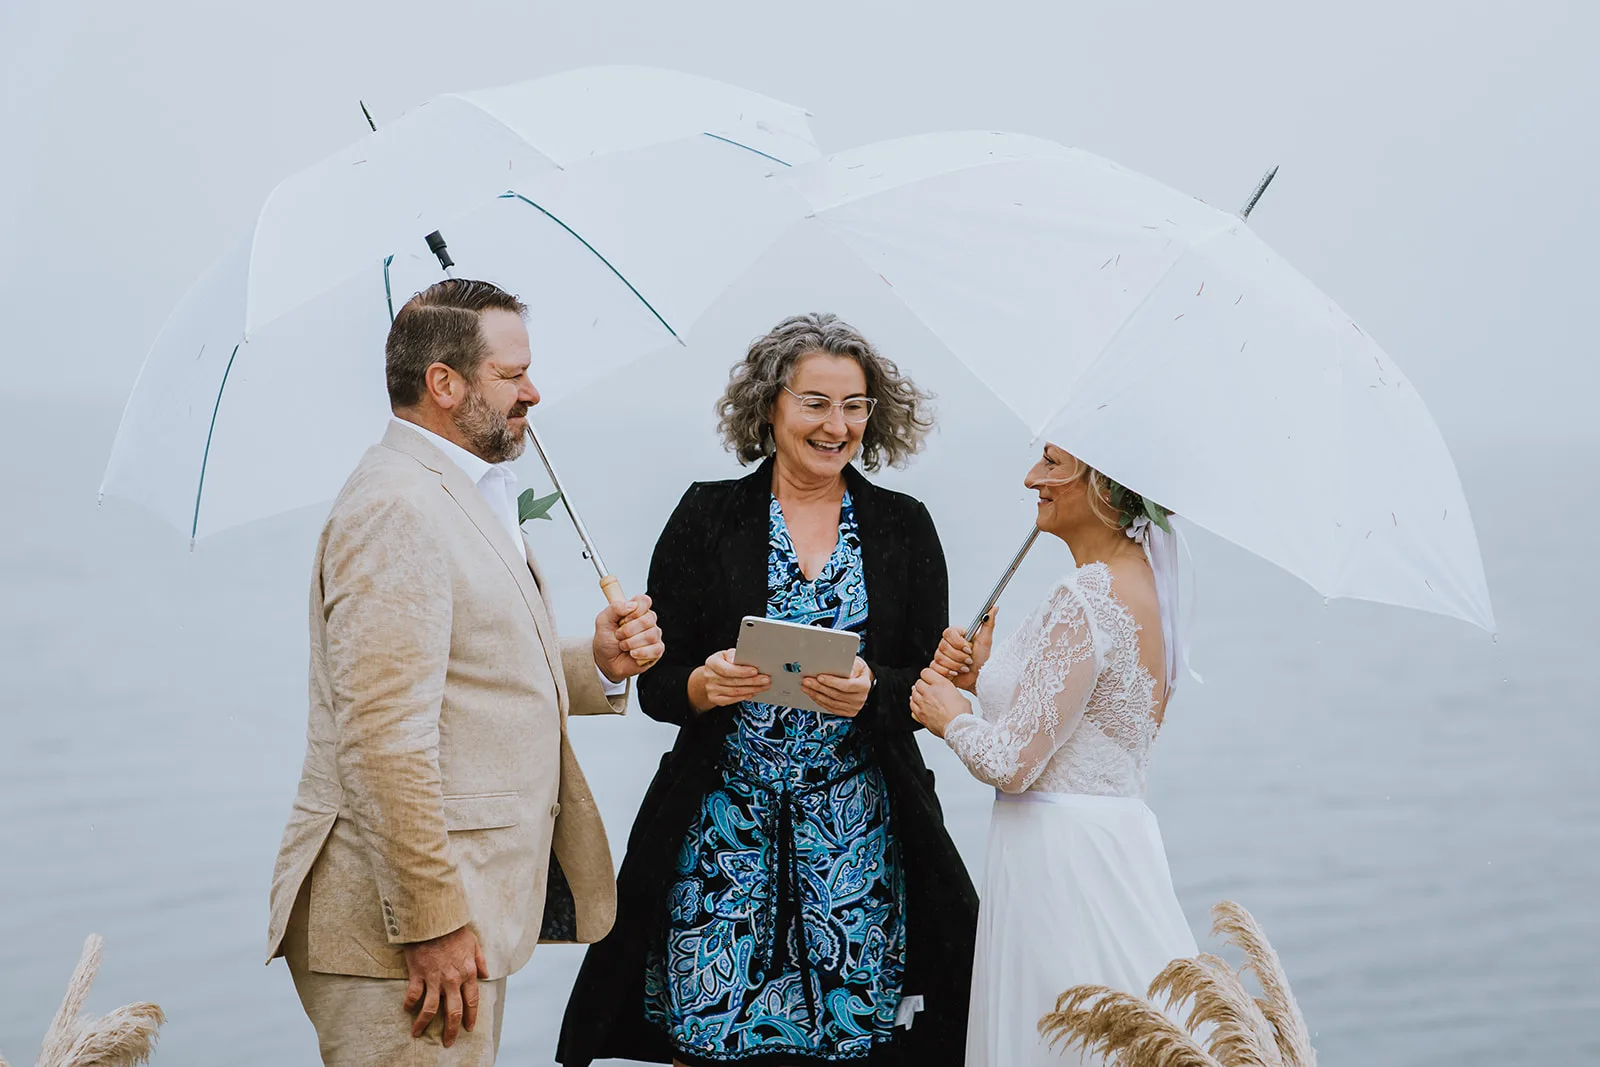 Officiant Amanda leading an elopement on a rainy day